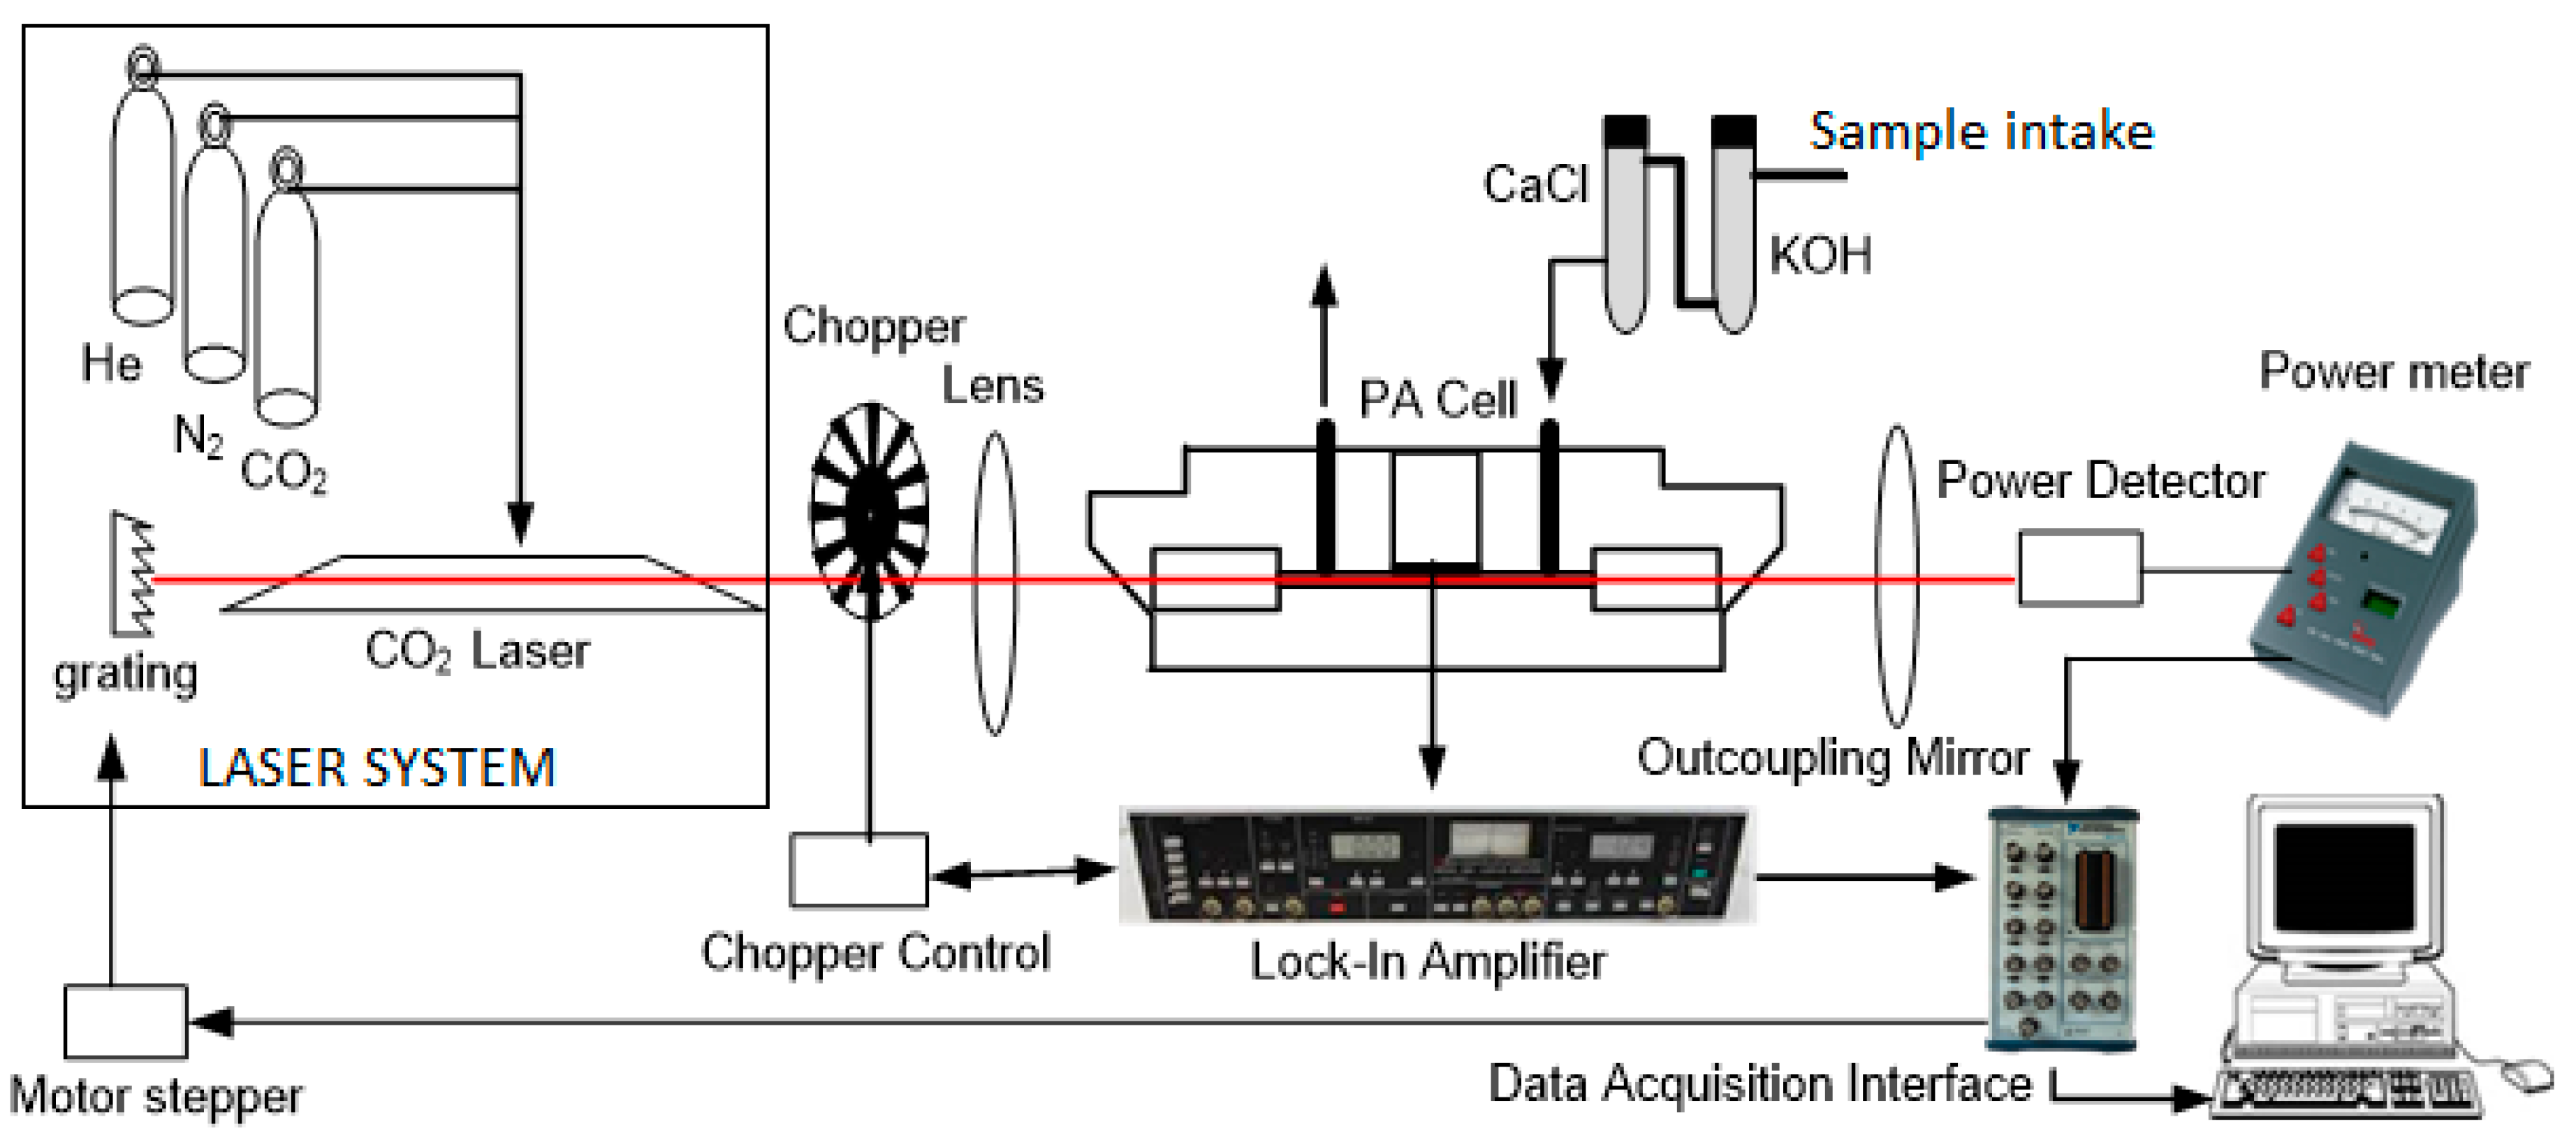 Biosensors | Free Full-Text | CO2 Laser Photoacoustic Spectrometer for  Measuring Acetone in the Breath of Lung Cancer Patients